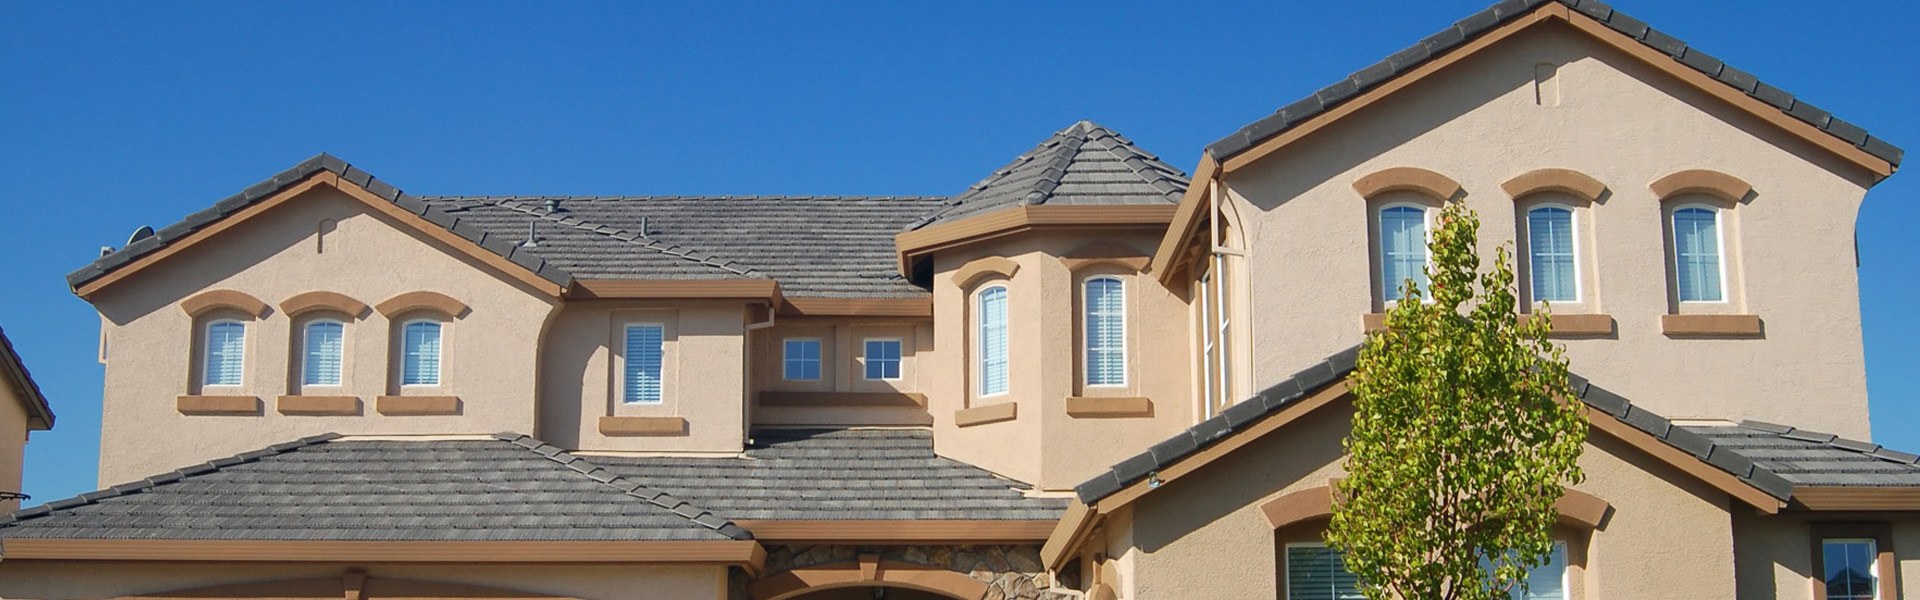 WE ALSO PERFORM ROOFING, ROOF REPAIRS AND ROOF REPLACEMENT FOR RESIDENTIAL HOMES, APARTMENTS AND CONDOS